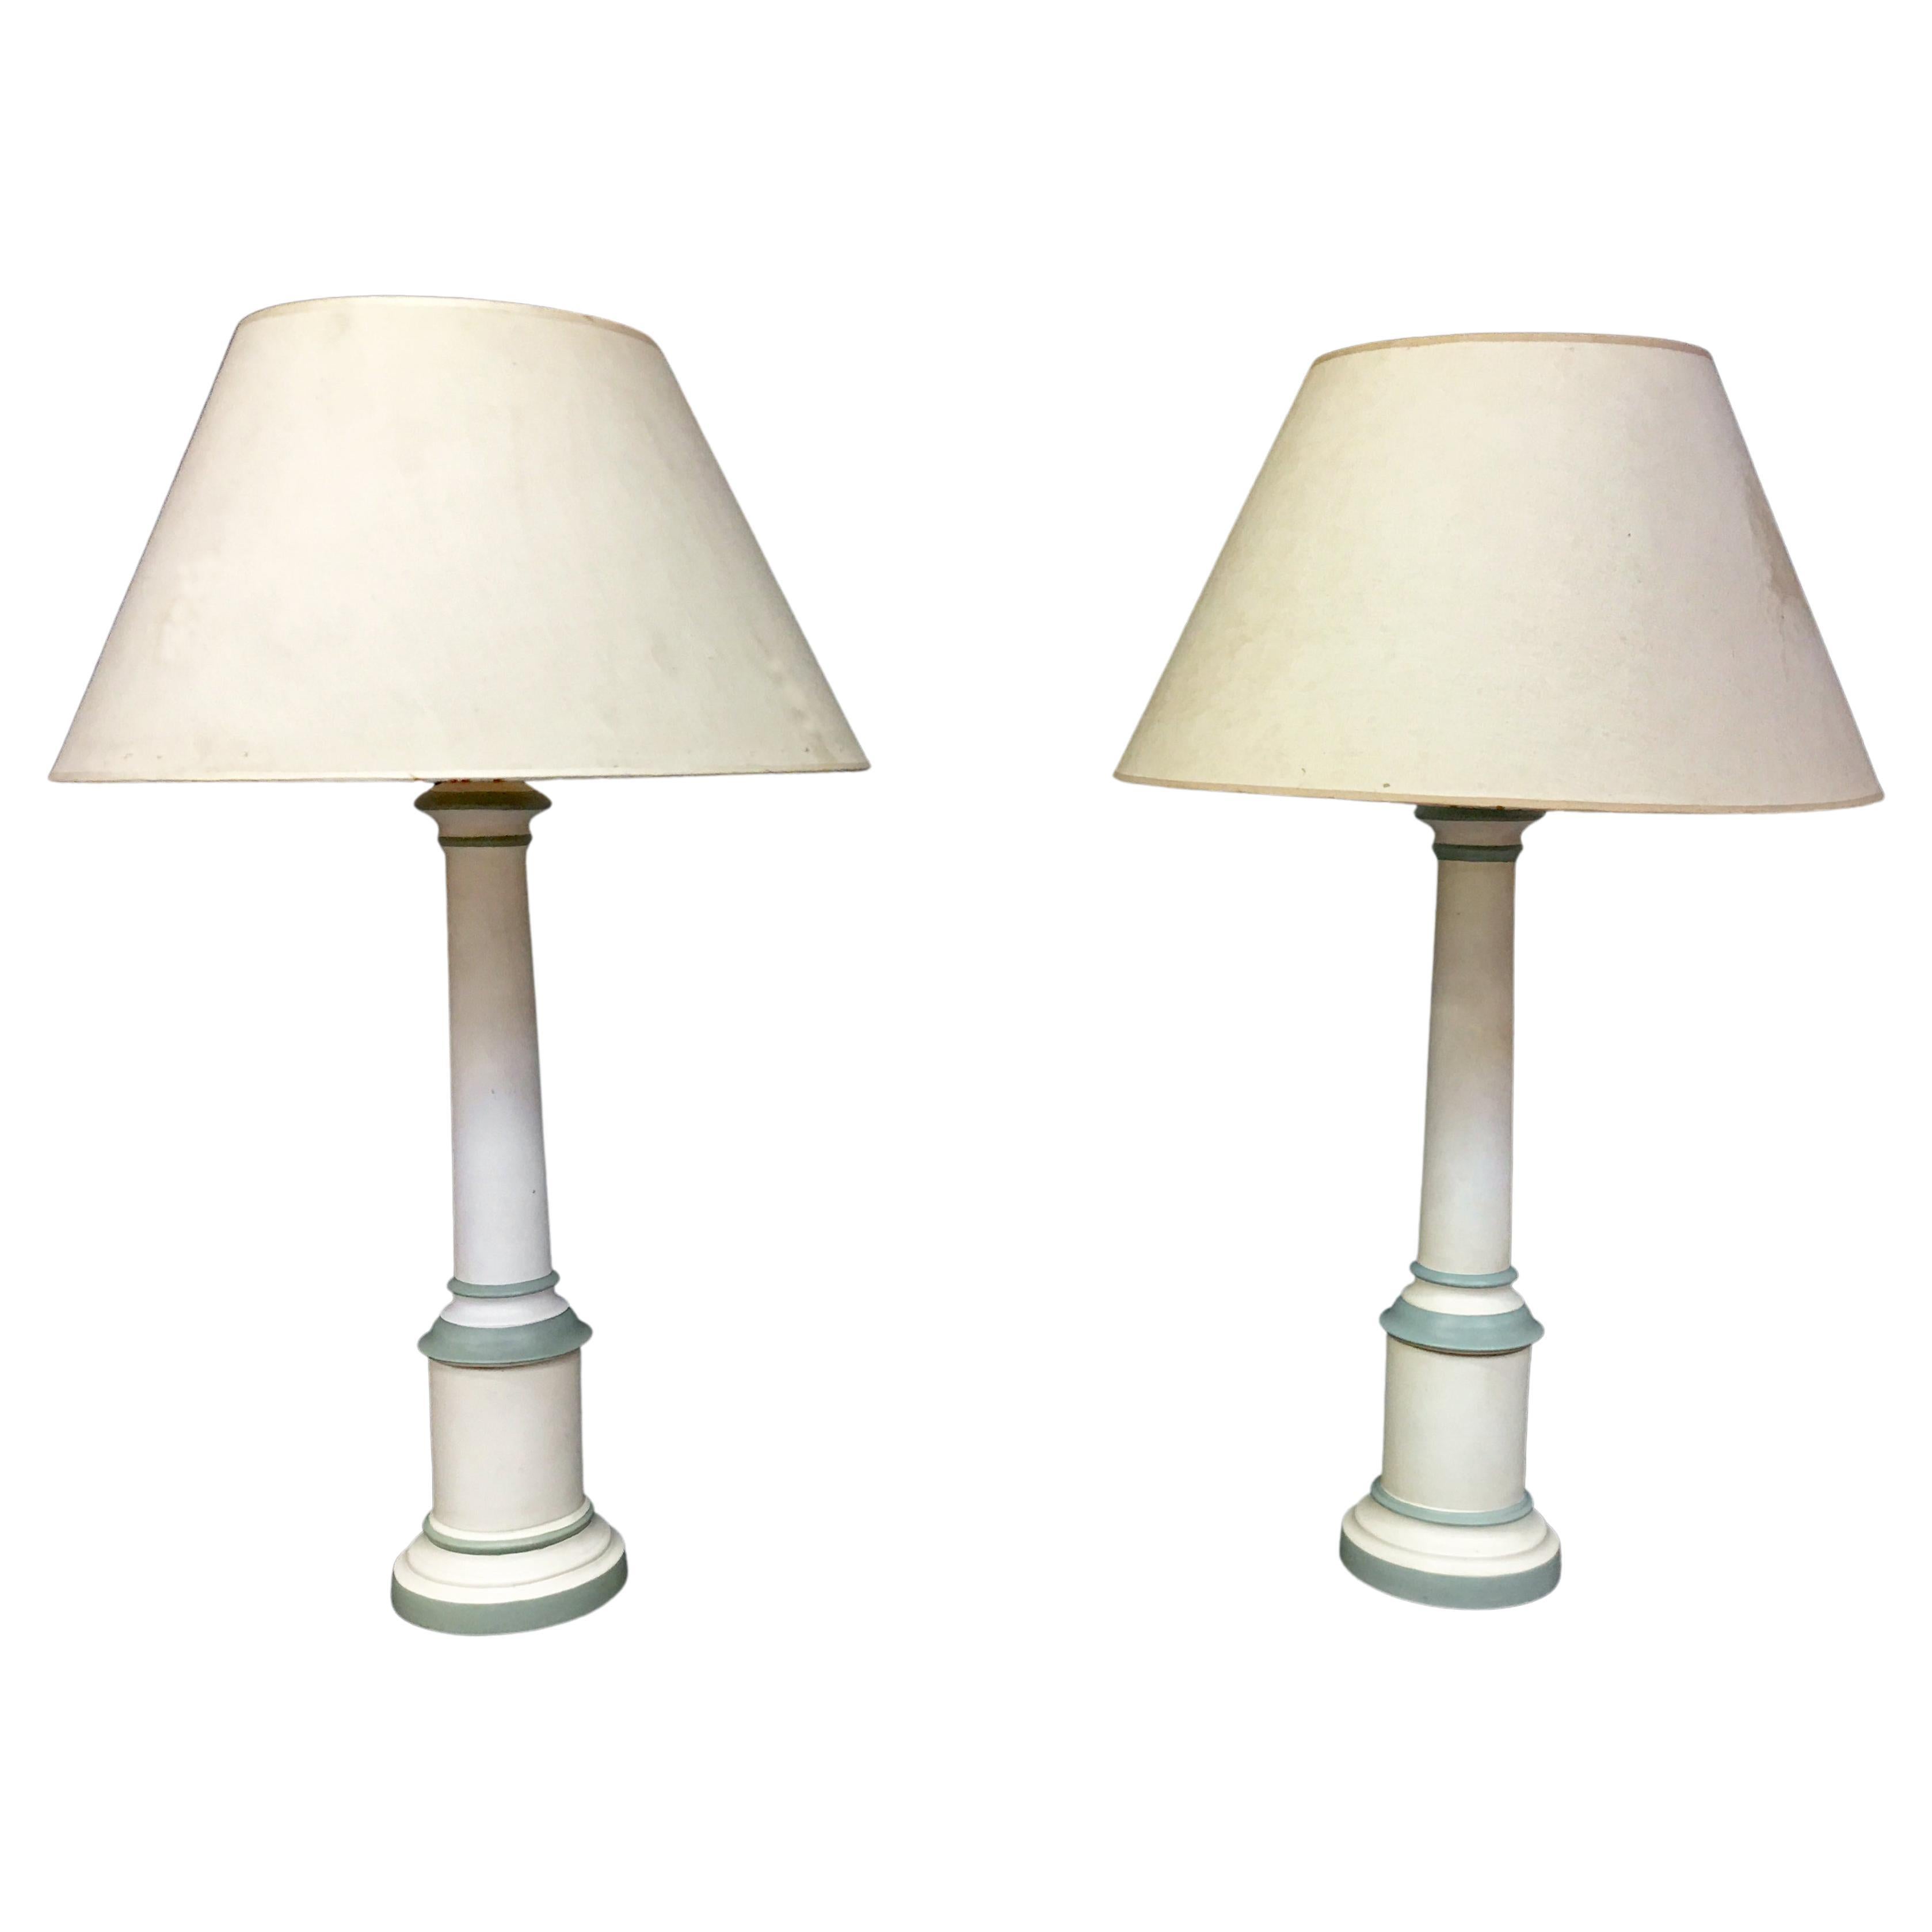 Neoclassical Pair of Patinated Terracotta Lamps circa 1960/1970 For Sale